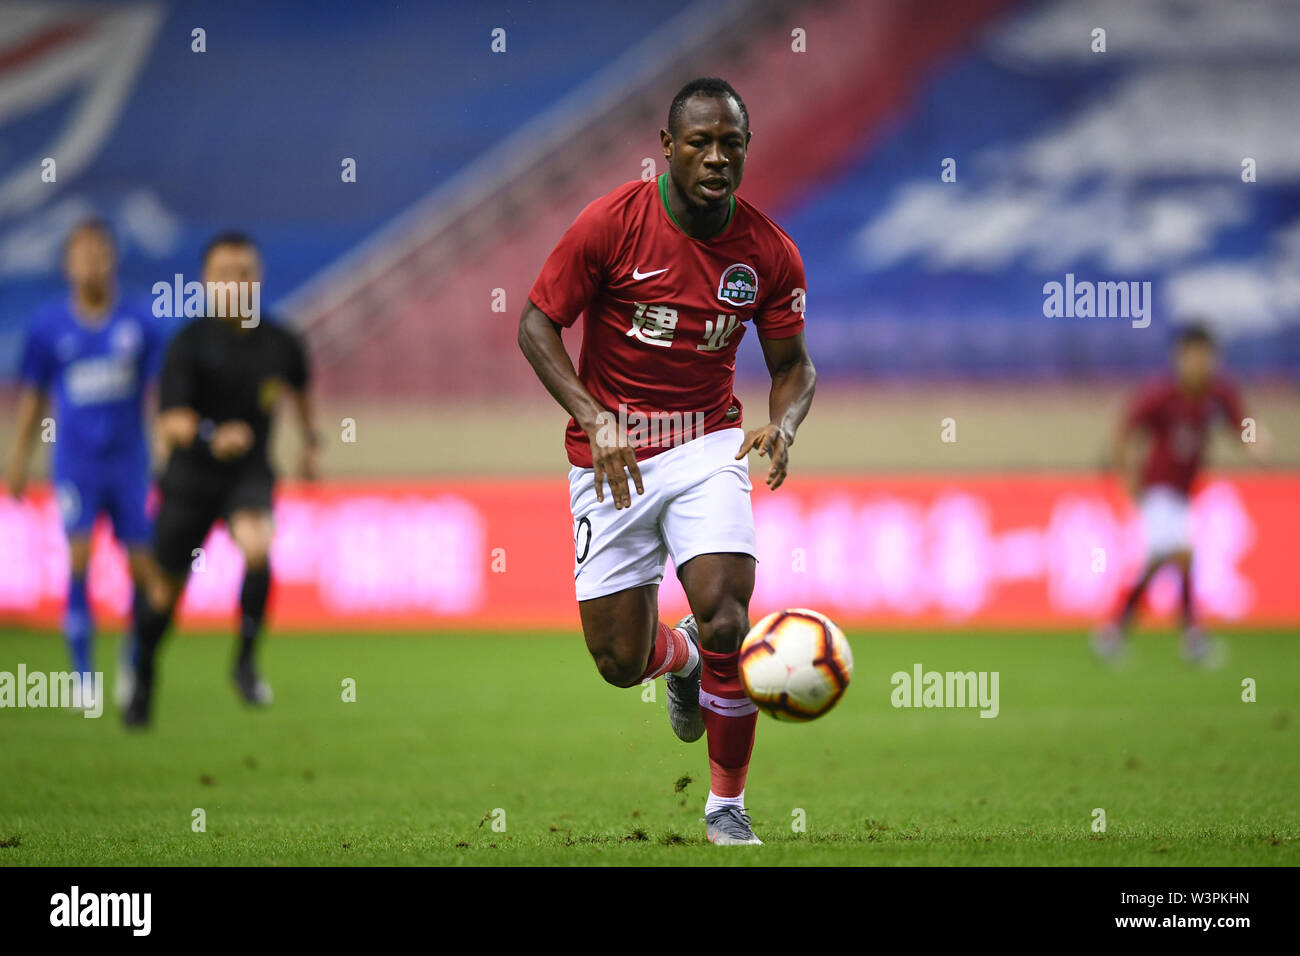 Cameroonian football player Christian Bassogog of Henan Jianye F.C. keeps the ball during the 18th round of Chinese Football Association Super League (CSL) against Shanghai Greenland Shenhua in Shanghai, China, 16 July 2019. Stock Photo